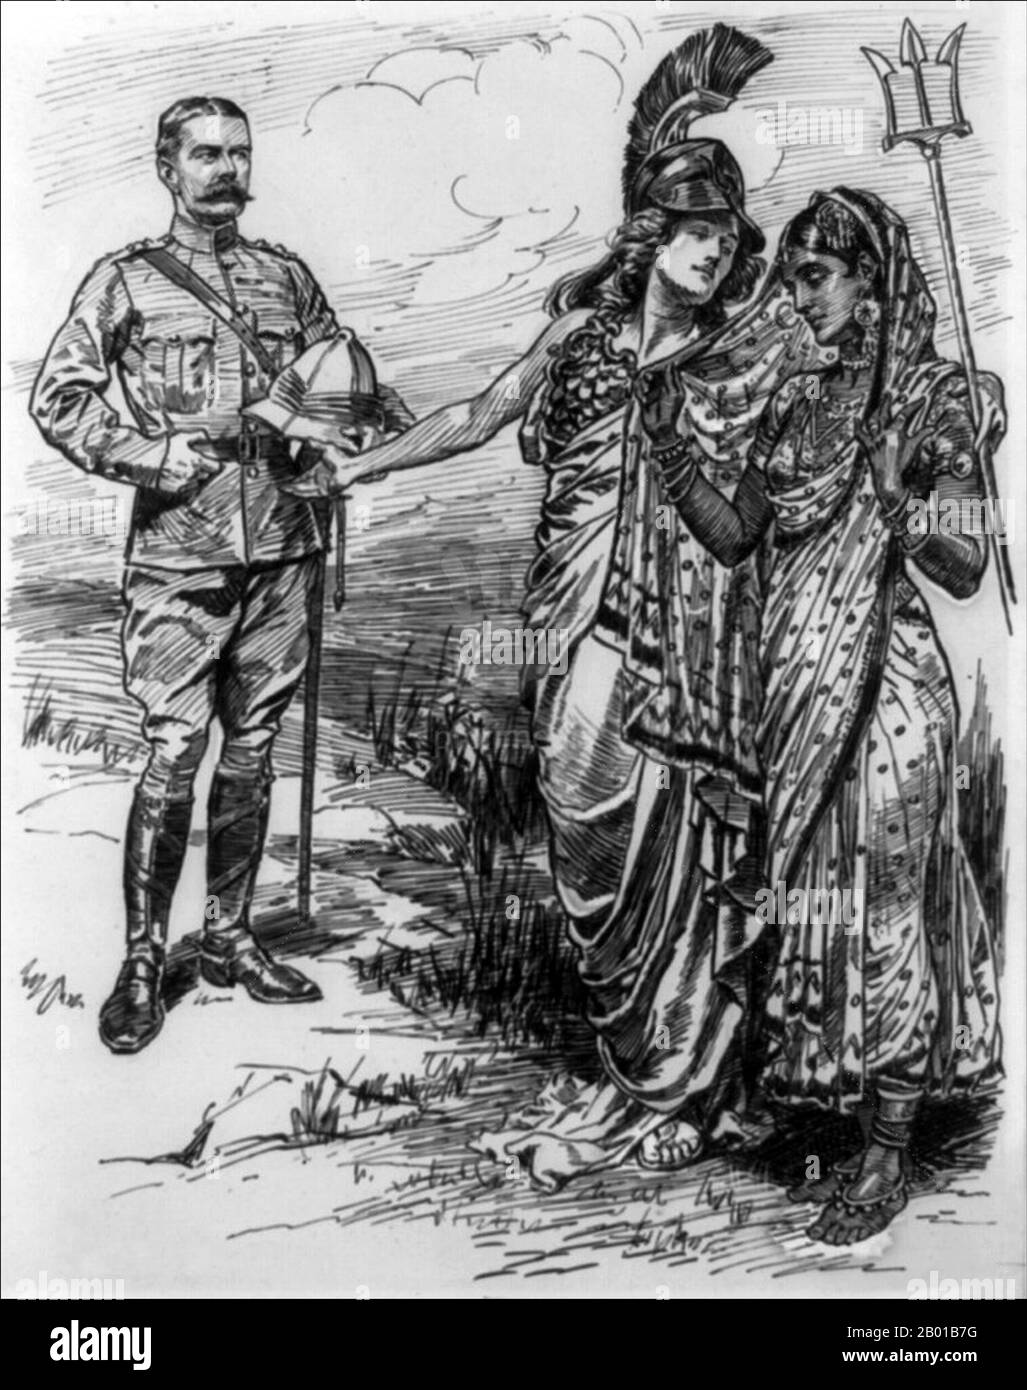 United Kingdom/India: 'Eastward ho!'. Cartoon for 'Punch' by Sir John Bernard Partridge (11 October 1861 - 9 August 1945), 16 July 1902.  Inscribed below title: 'We can ill spare him; but you see we give you of our best.'  Britannia, holding her trident, introduces Lord Kitchener to a demurely veiled India. Horatio Herbert Kitchener (24 June 1850 - 5 June 1916) served as Commander-in-Chief of India (r. 1902-1909) after his triumphant return from the Boer Wars in South Africa in 1902. Stock Photo